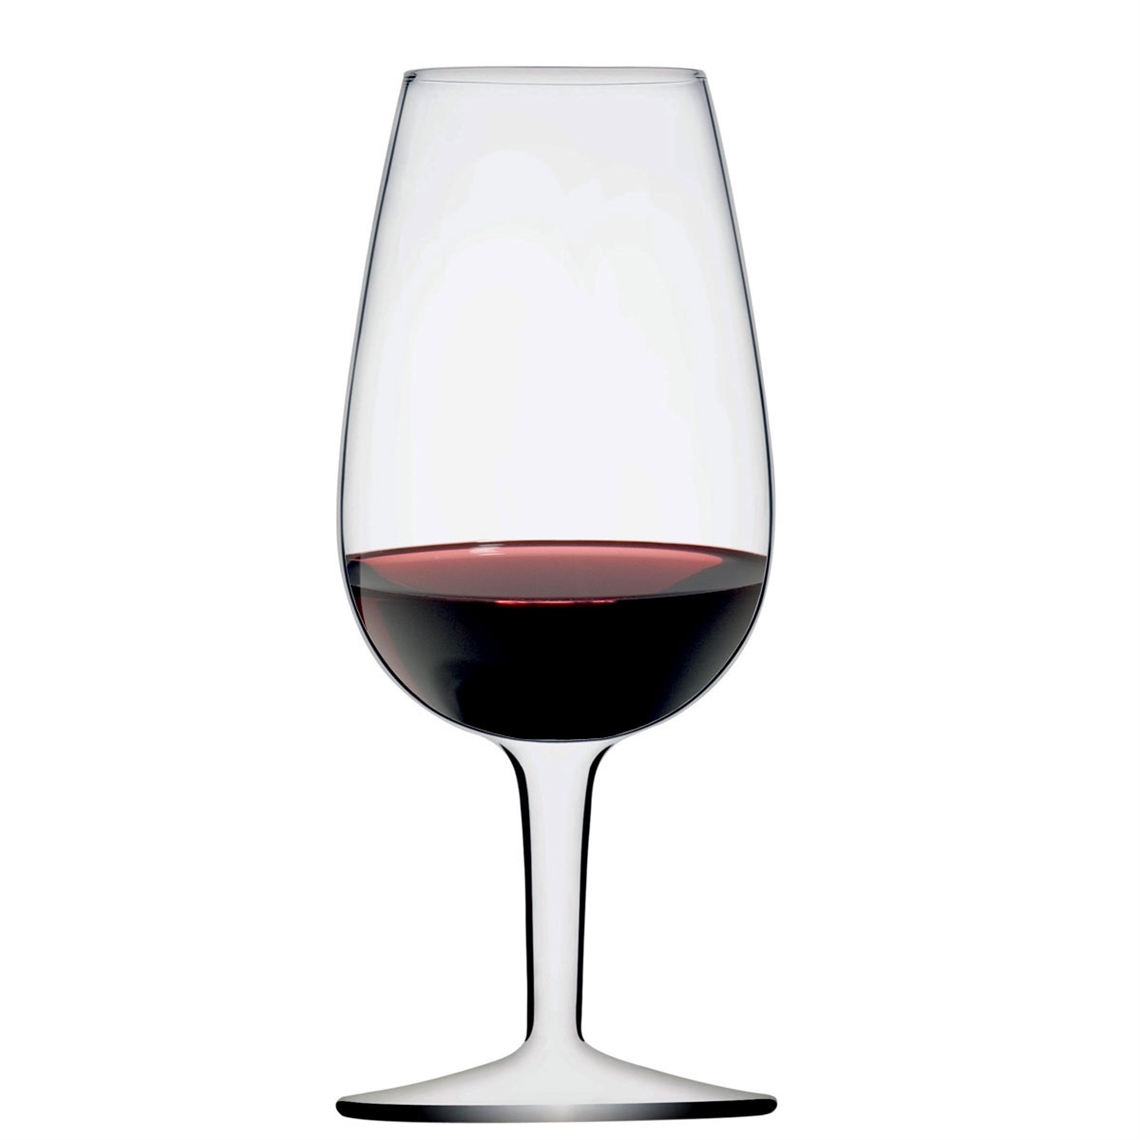 View more de long from our Wine Tasting Glasses range